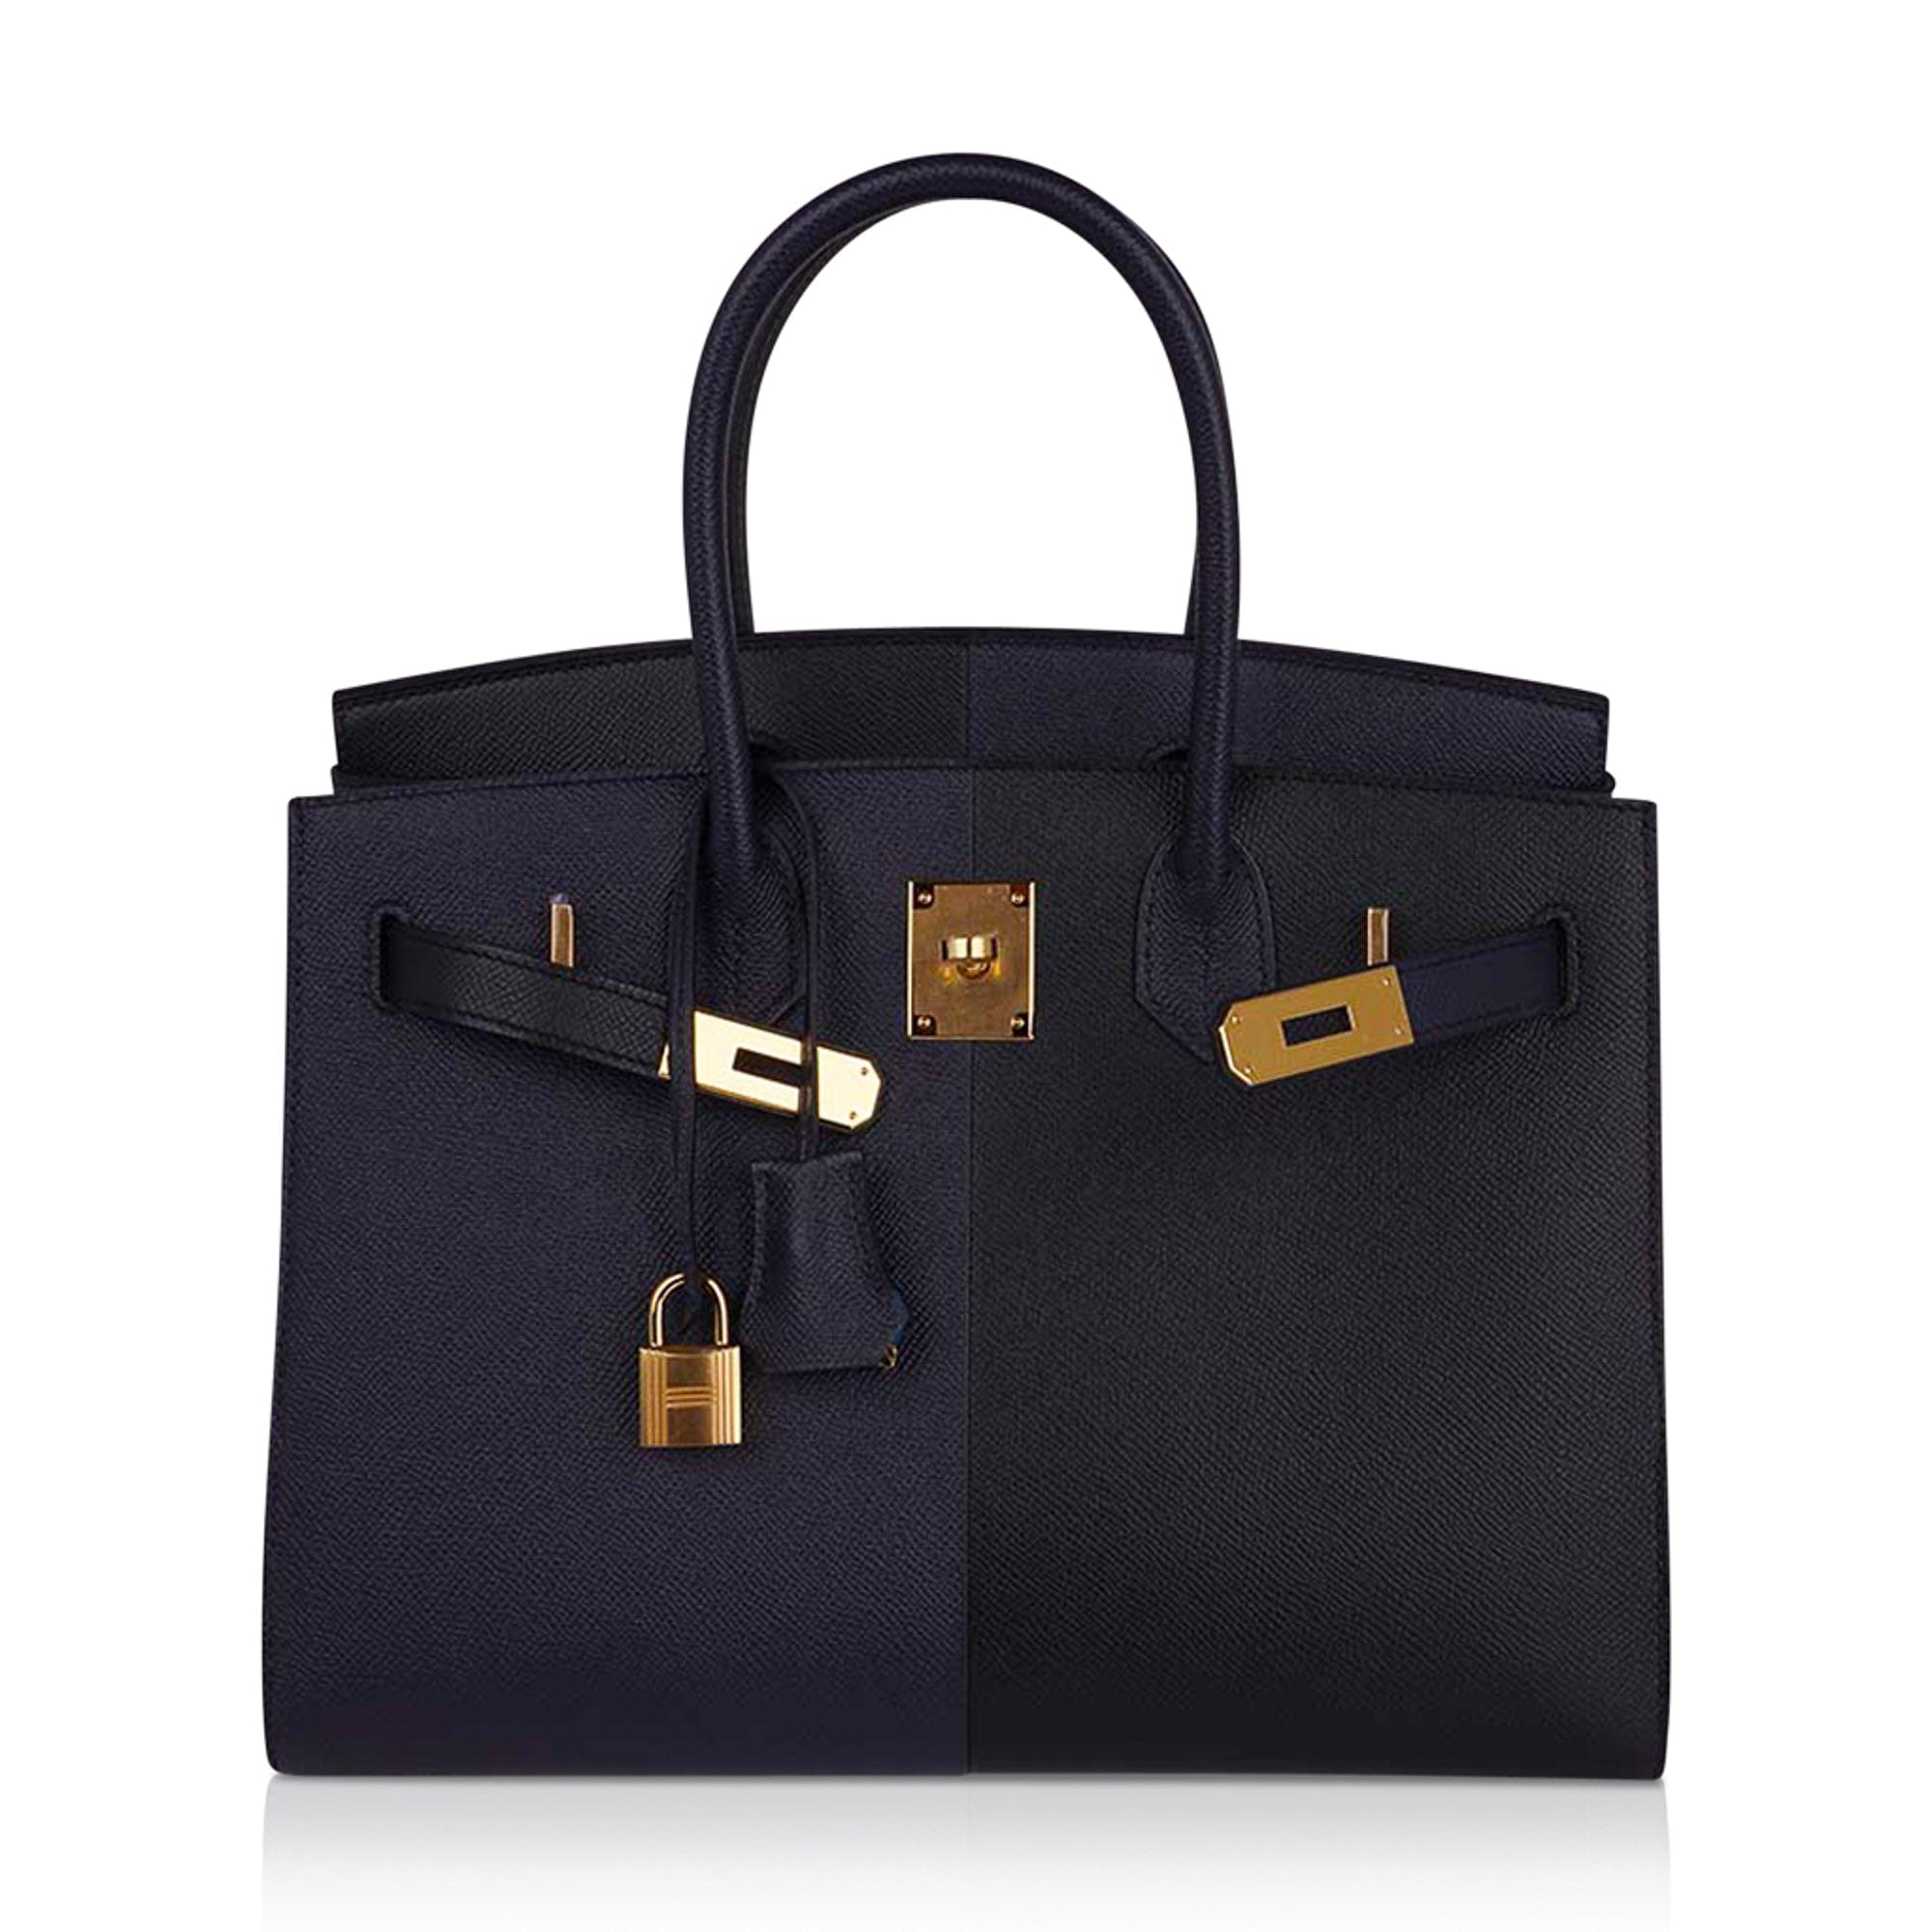 Kelly 25 Bleu Nuit in Togo Leather with Gold Hardware